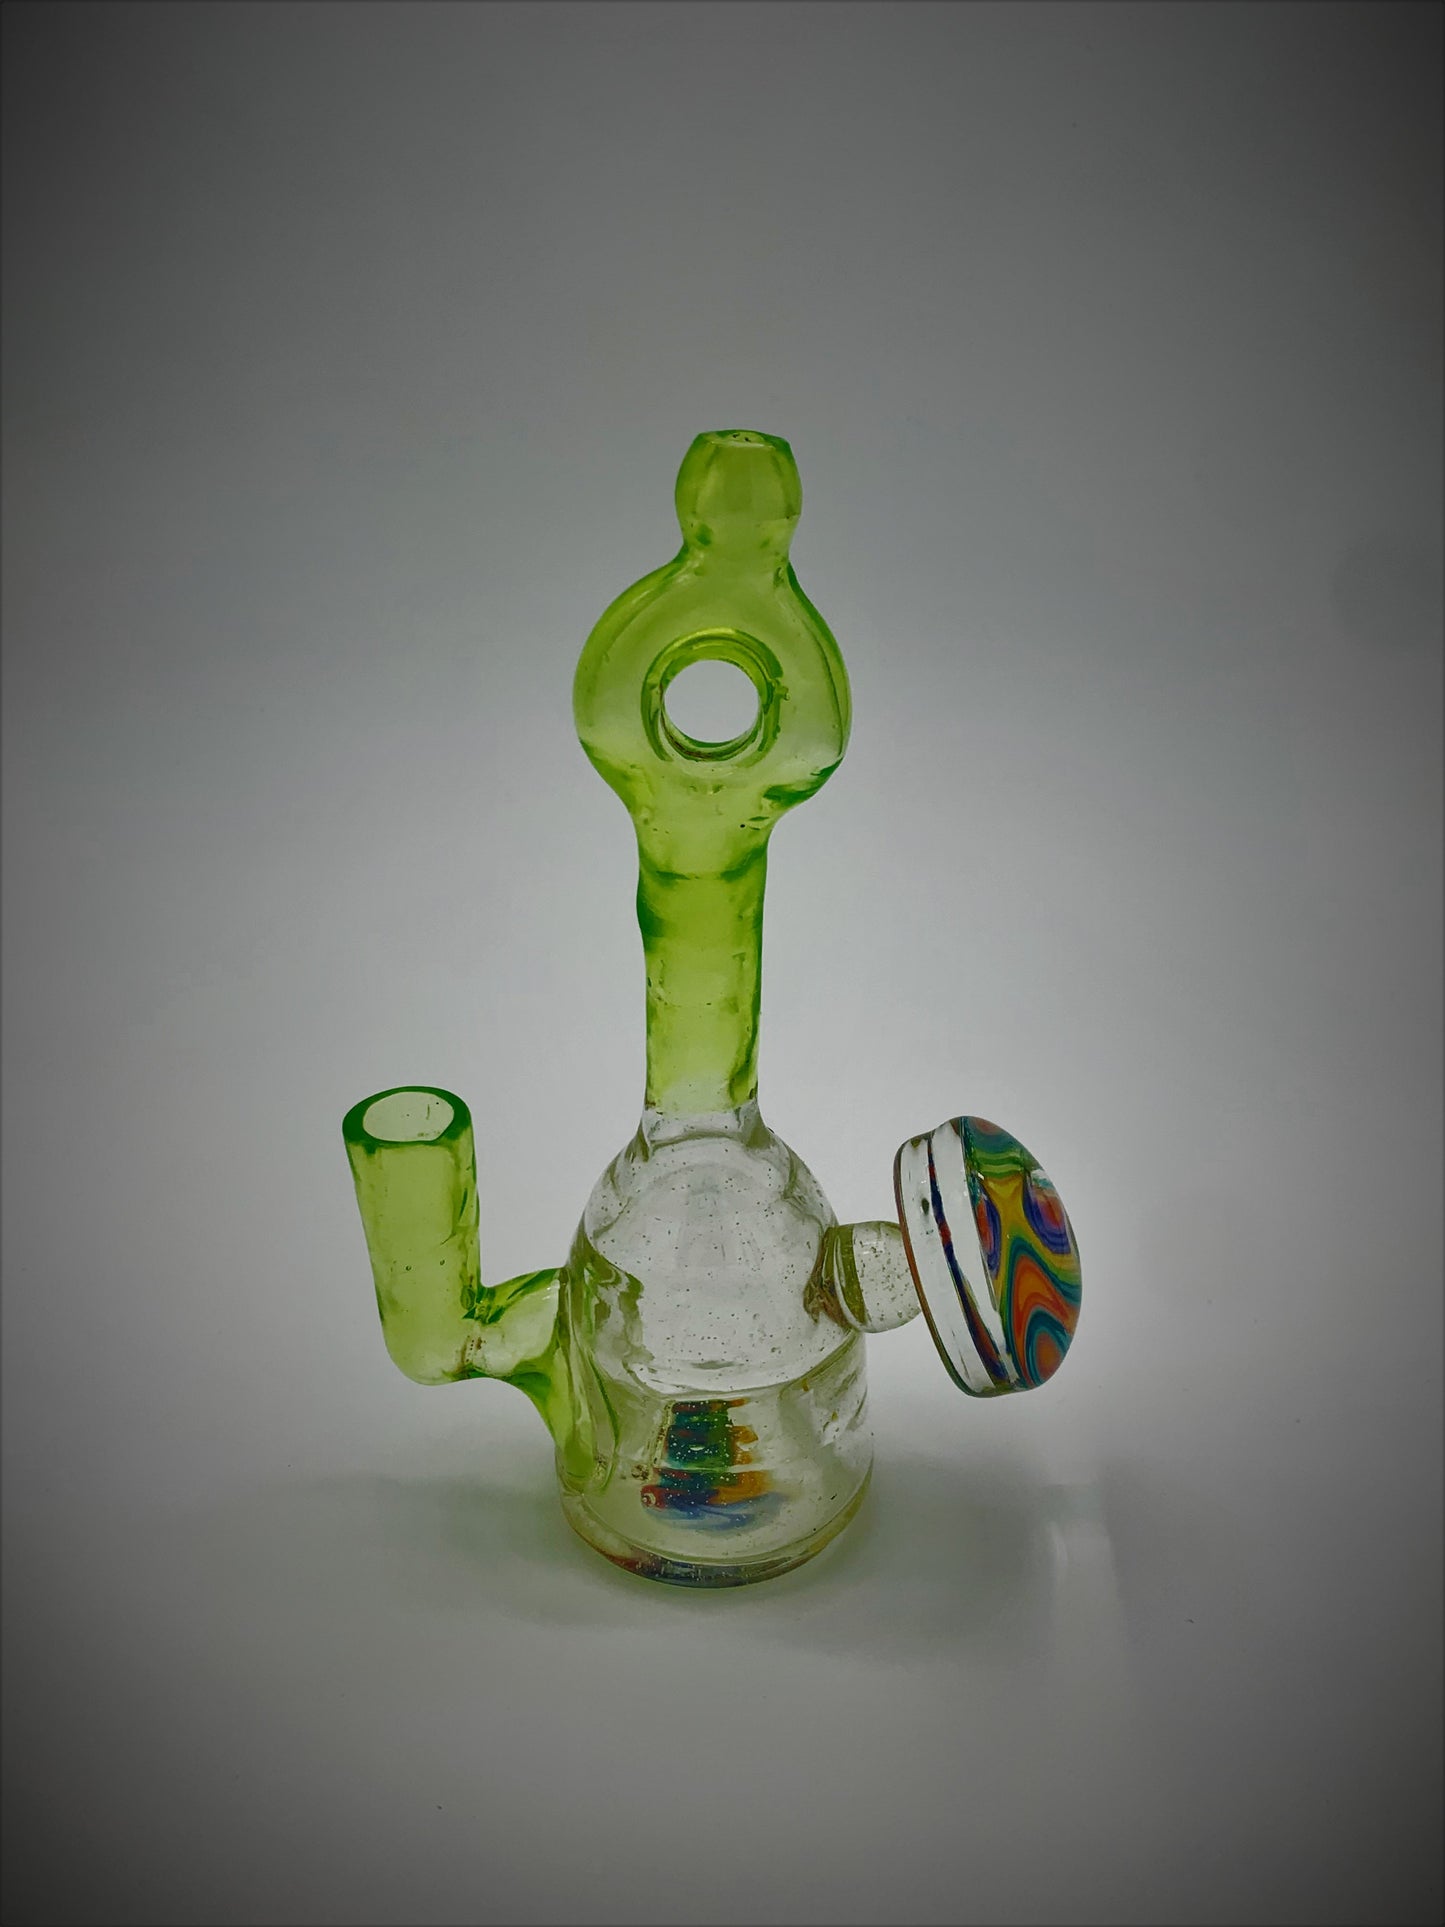 14mm Sublime with UV Encalmo Base with a Reveral WigWag Dab Rig